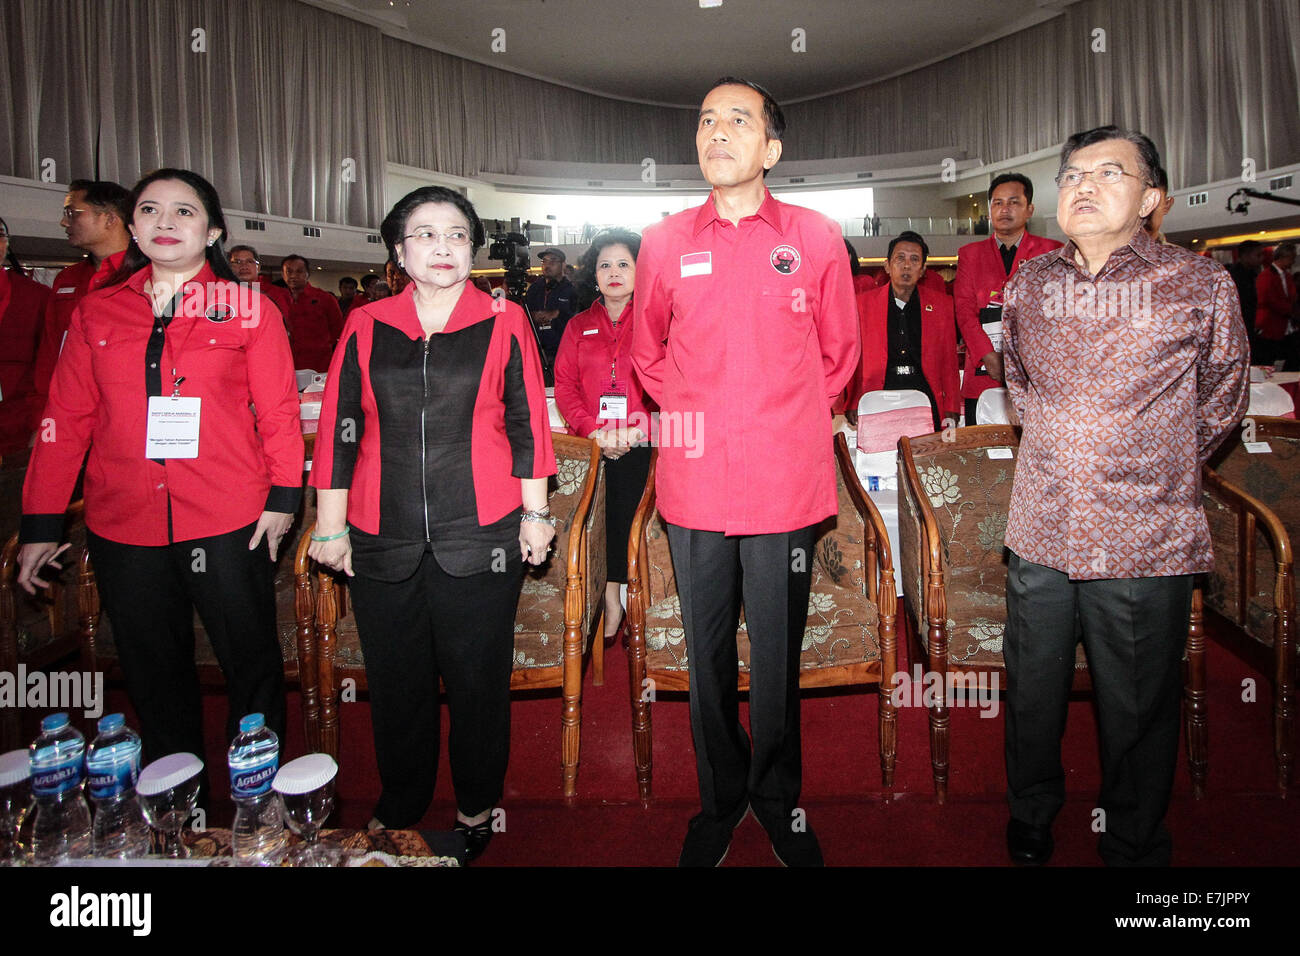 Semarang, Indonesia. 19th September, 2014. From Left, chairman of PDI-P party who also the daughter of Megawati, Puan Maharani, Former president and chairperson of Indonesian Democratic Party of Struggle (PDI-P) Megawati Sukarnoputri, Indonesian president-elect Joko Widodo and Vice president-elect Jusuf Kalla attend the 4th national working meeting of PDI-P at Marina Convention Hall in Semarang, Central Java, Indonesia. The national meeting attended by 1,590 party cadres from all over Indonesia and take place from 19-21 September 2014. Credit:  PACIFIC PRESS/Alamy Live News Stock Photo